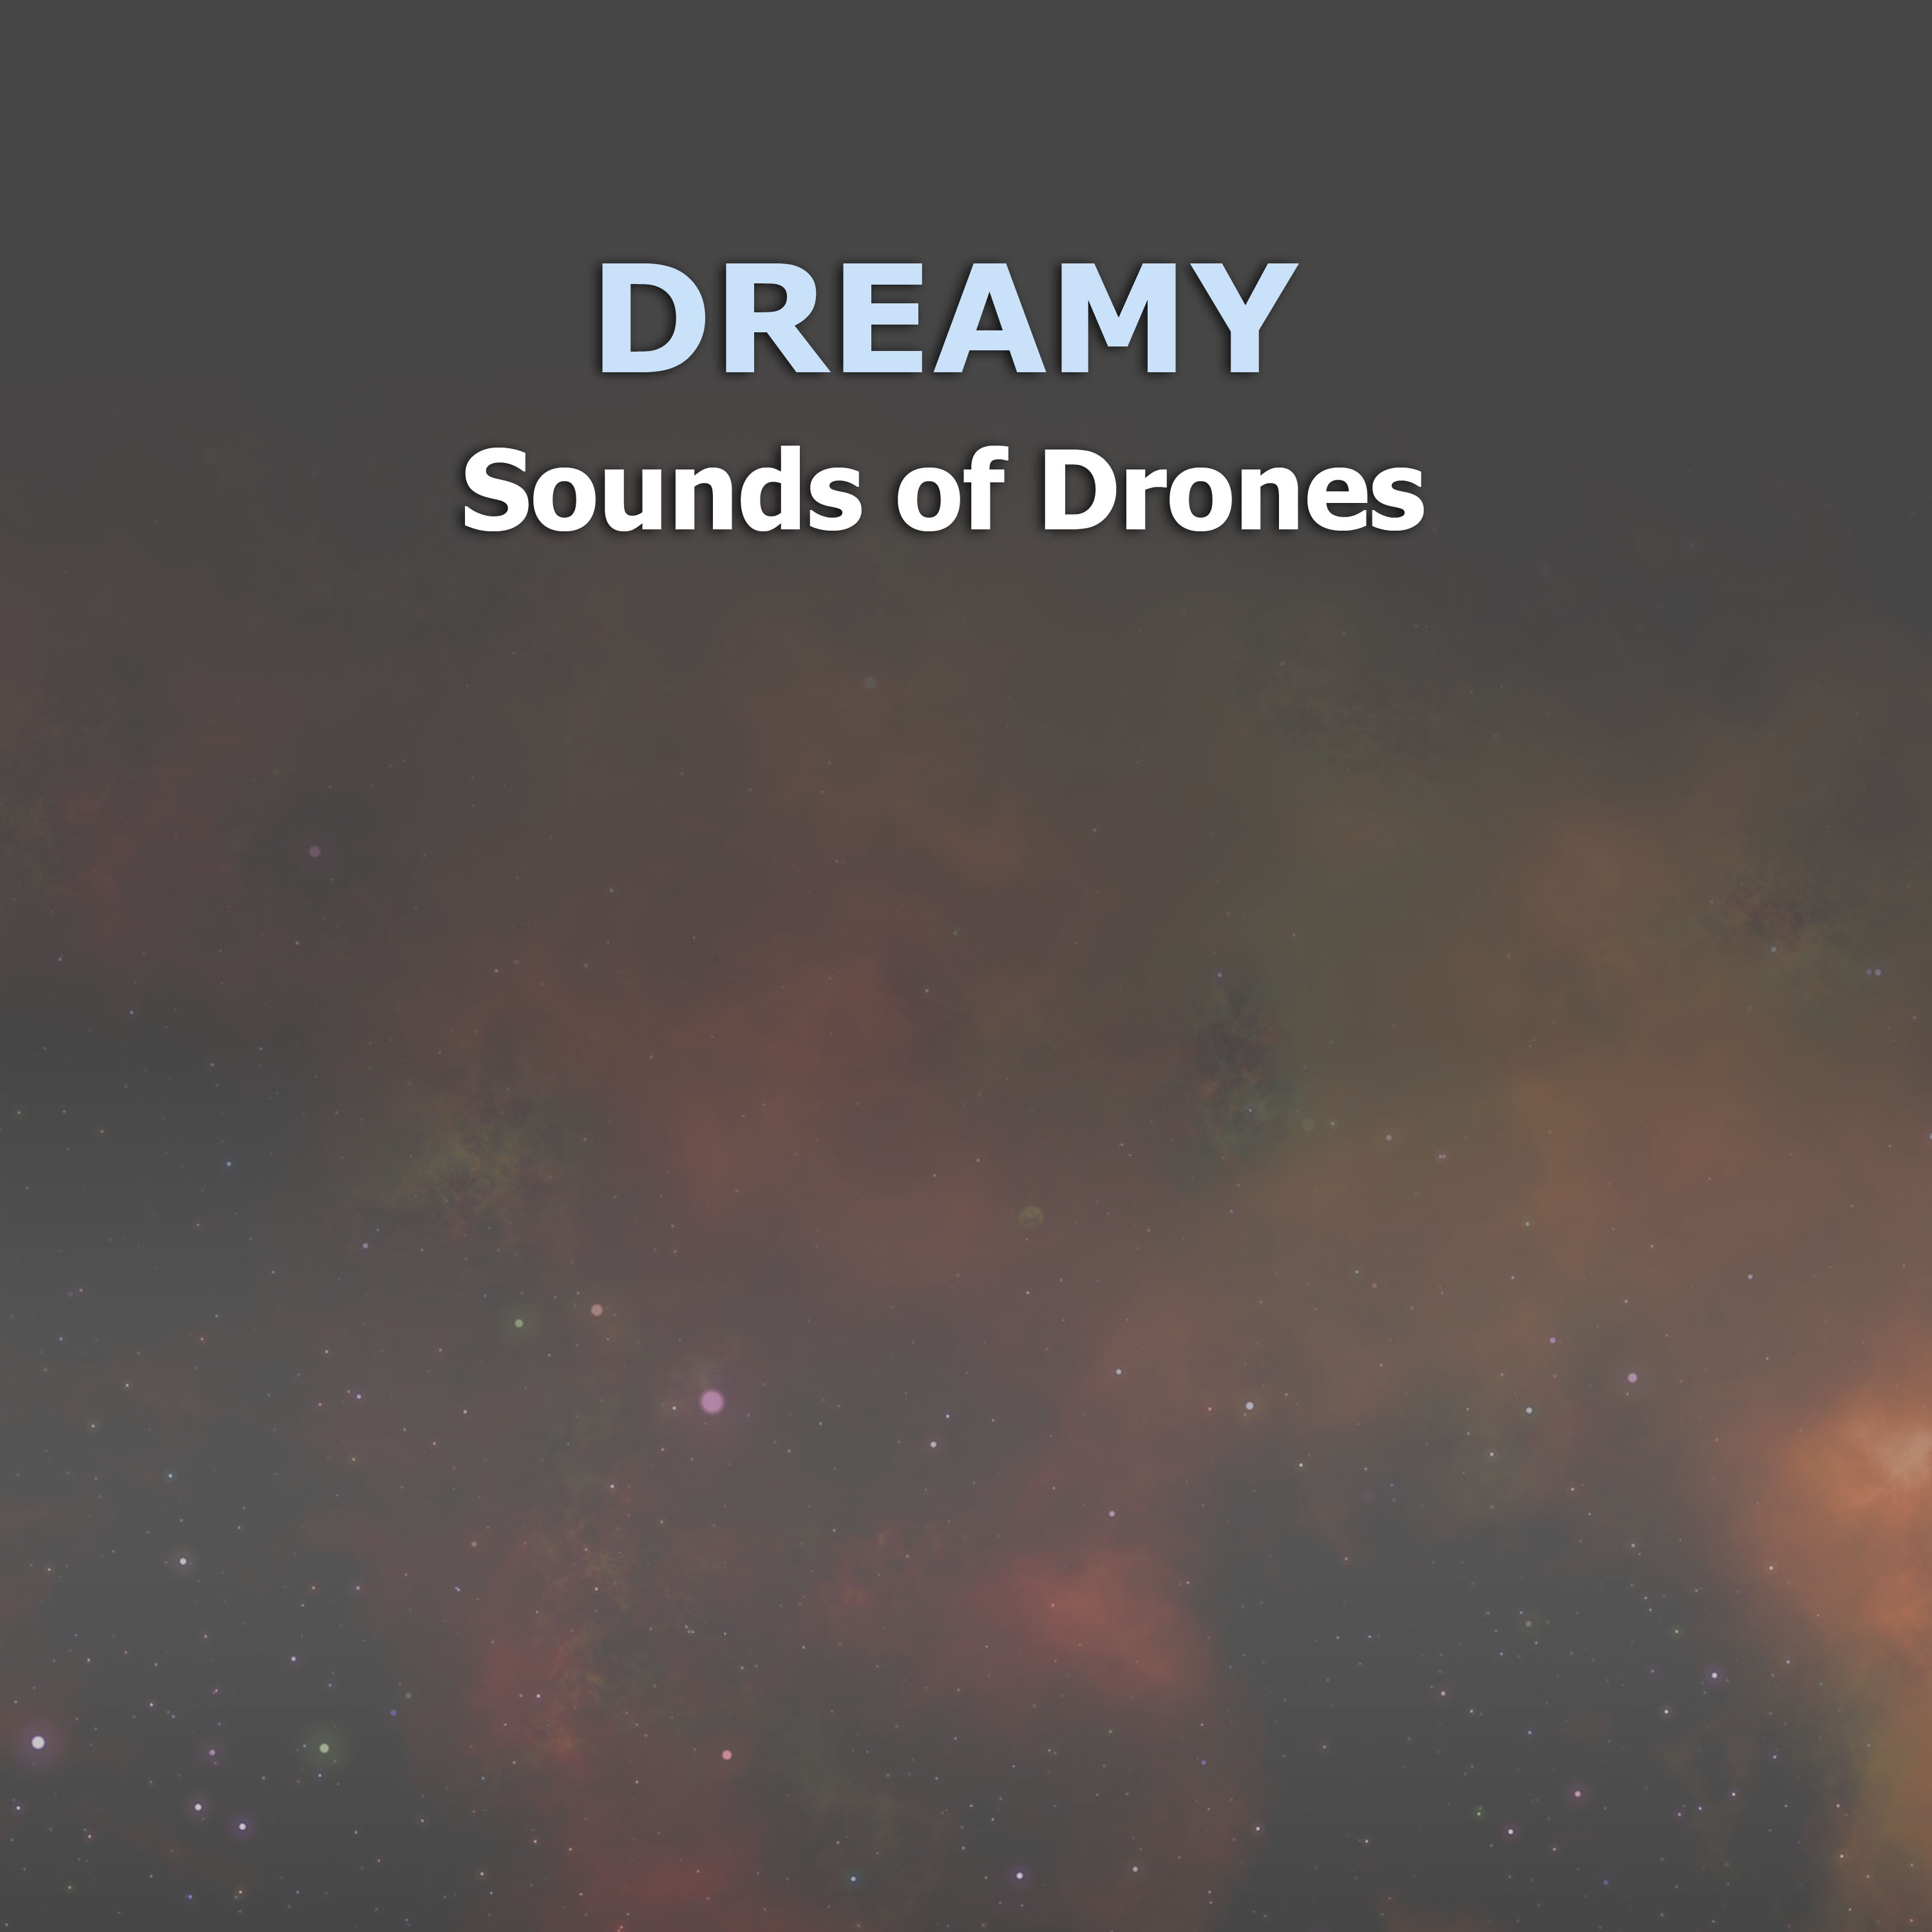 14 Dreamy Sounds of Drones